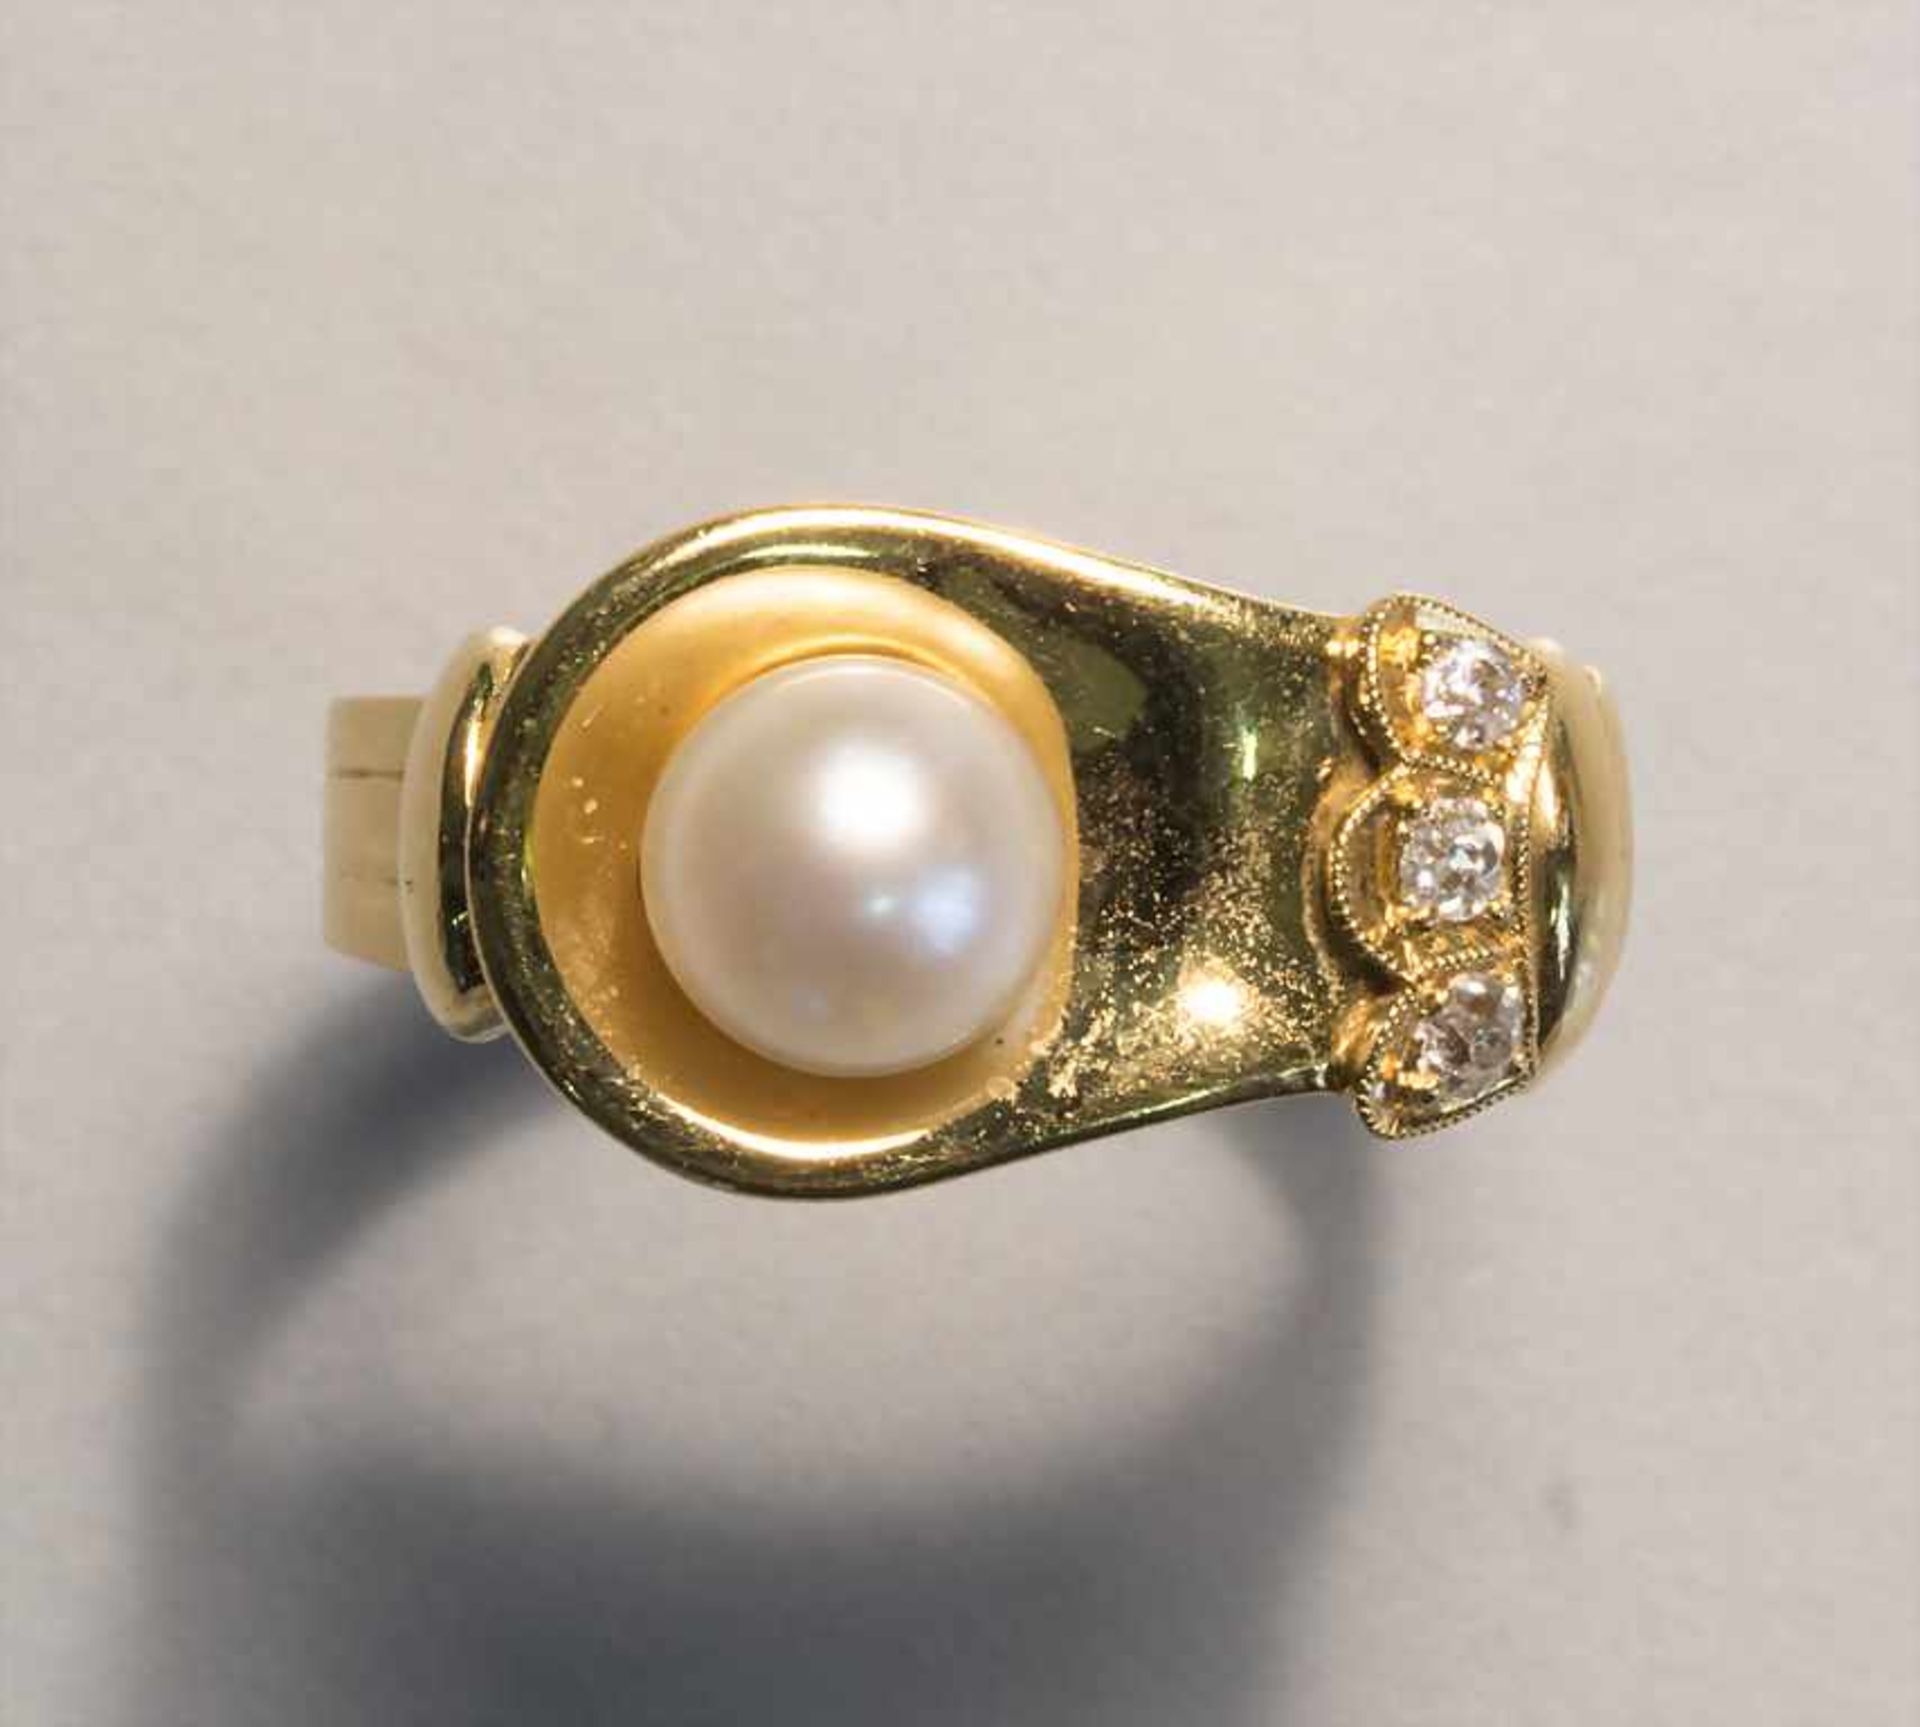 Damenring mit Perle und Diamanten / A ladies ring with a pearl and diamonds - Image 2 of 3